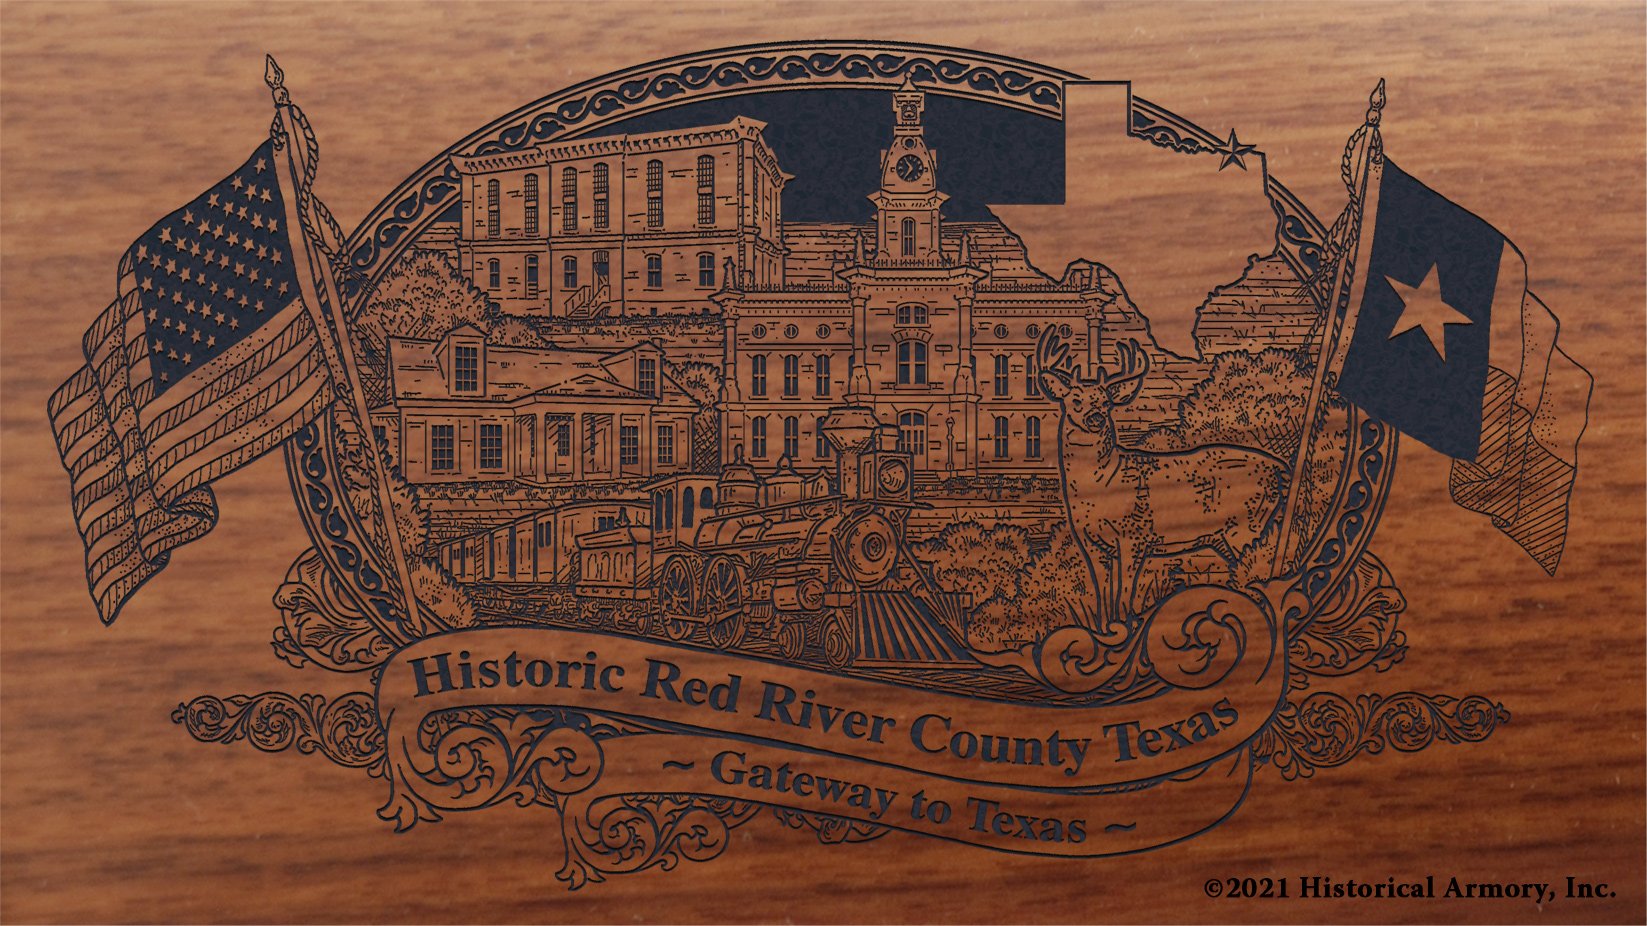 Engraved artwork | History of Red River County Texas | Historical Armory